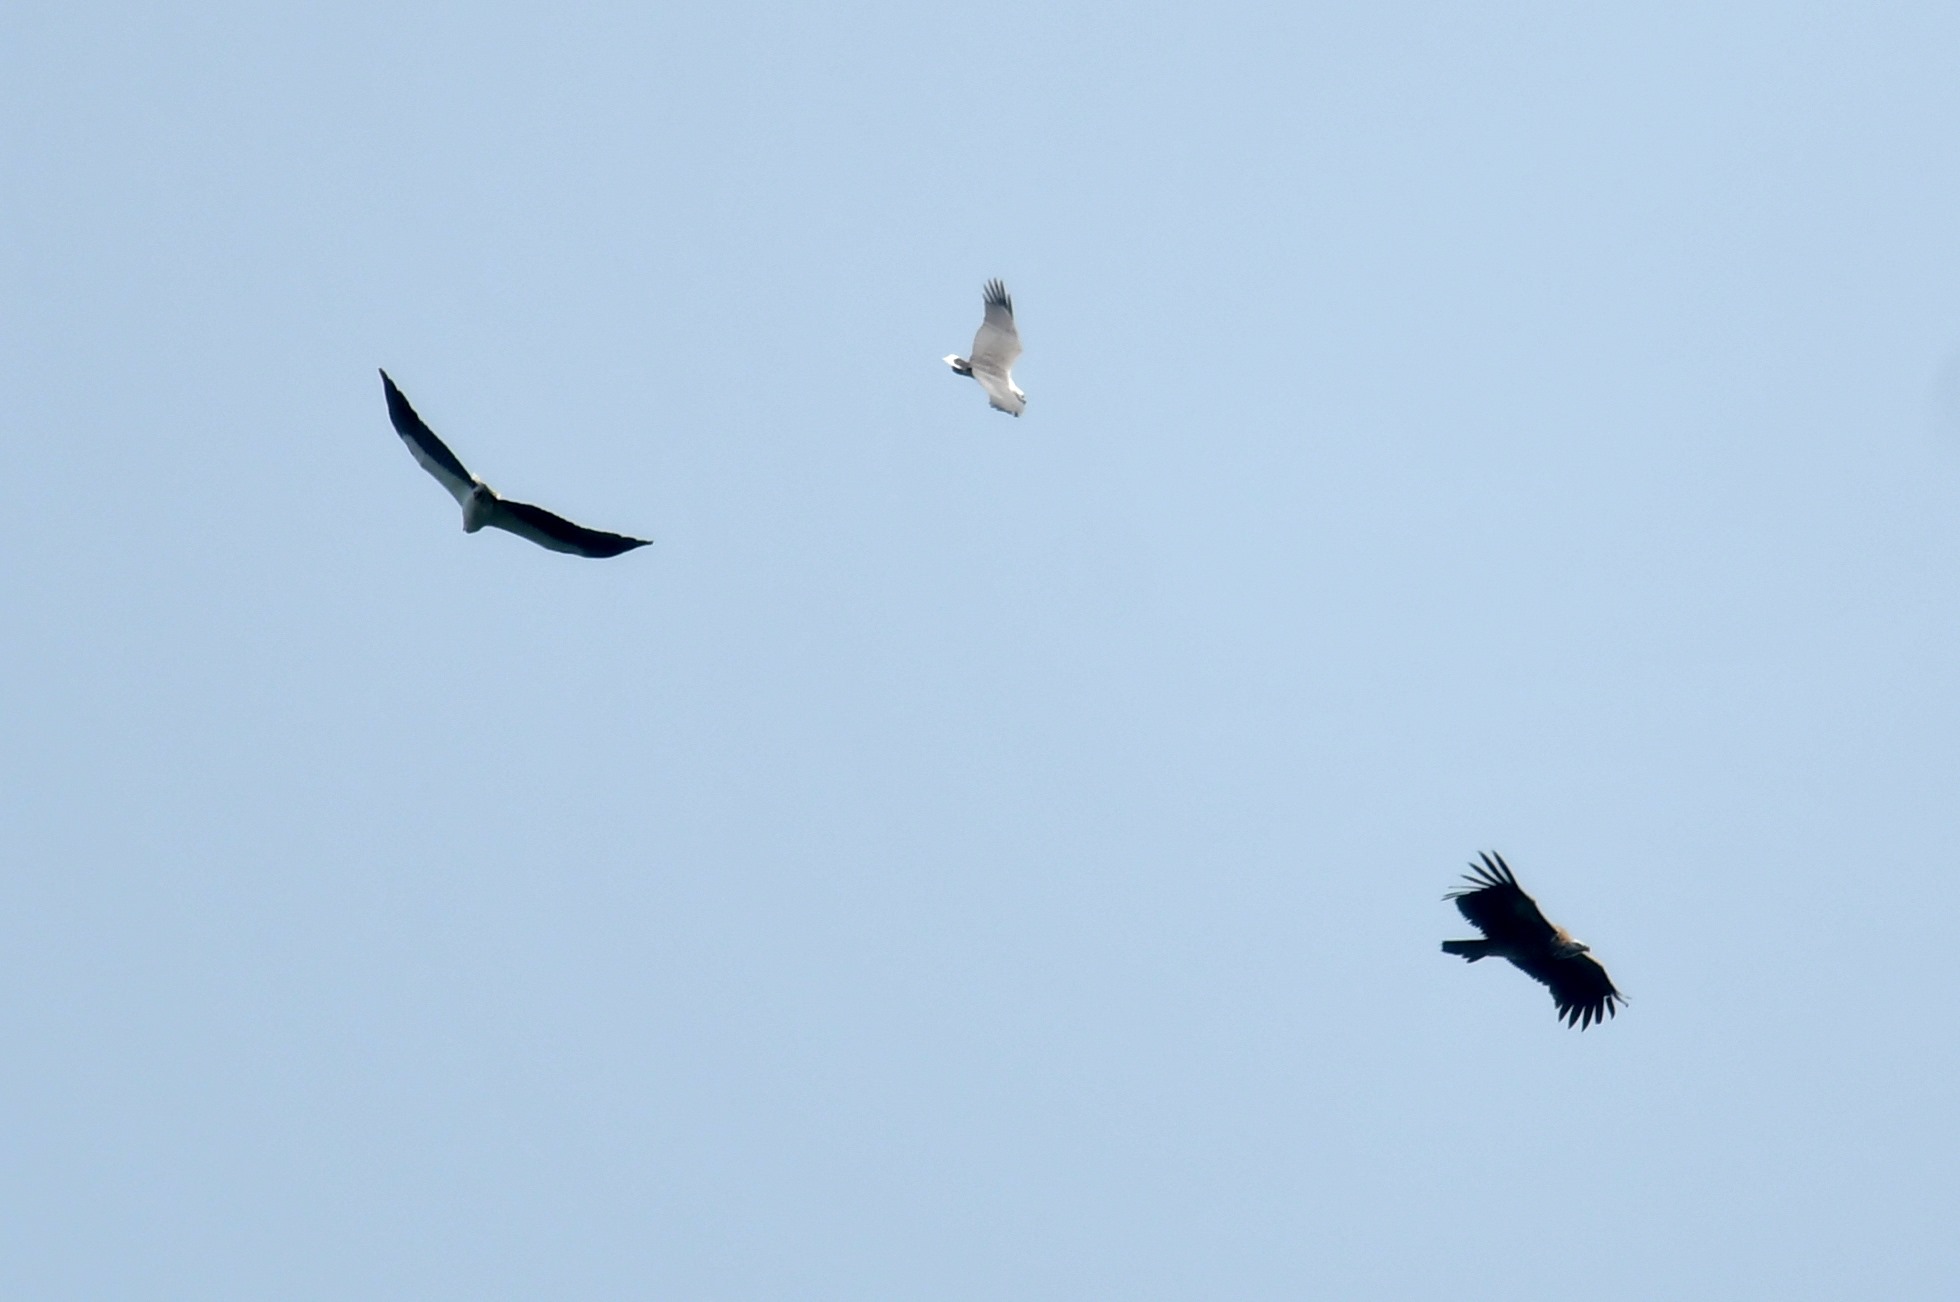 S Pore White Bellied Sea Eagle Chases Pair Of Himalayan Griffon Vultures Away At Bukit Timah Mothership Sg News From Singapore Asia And Around The World